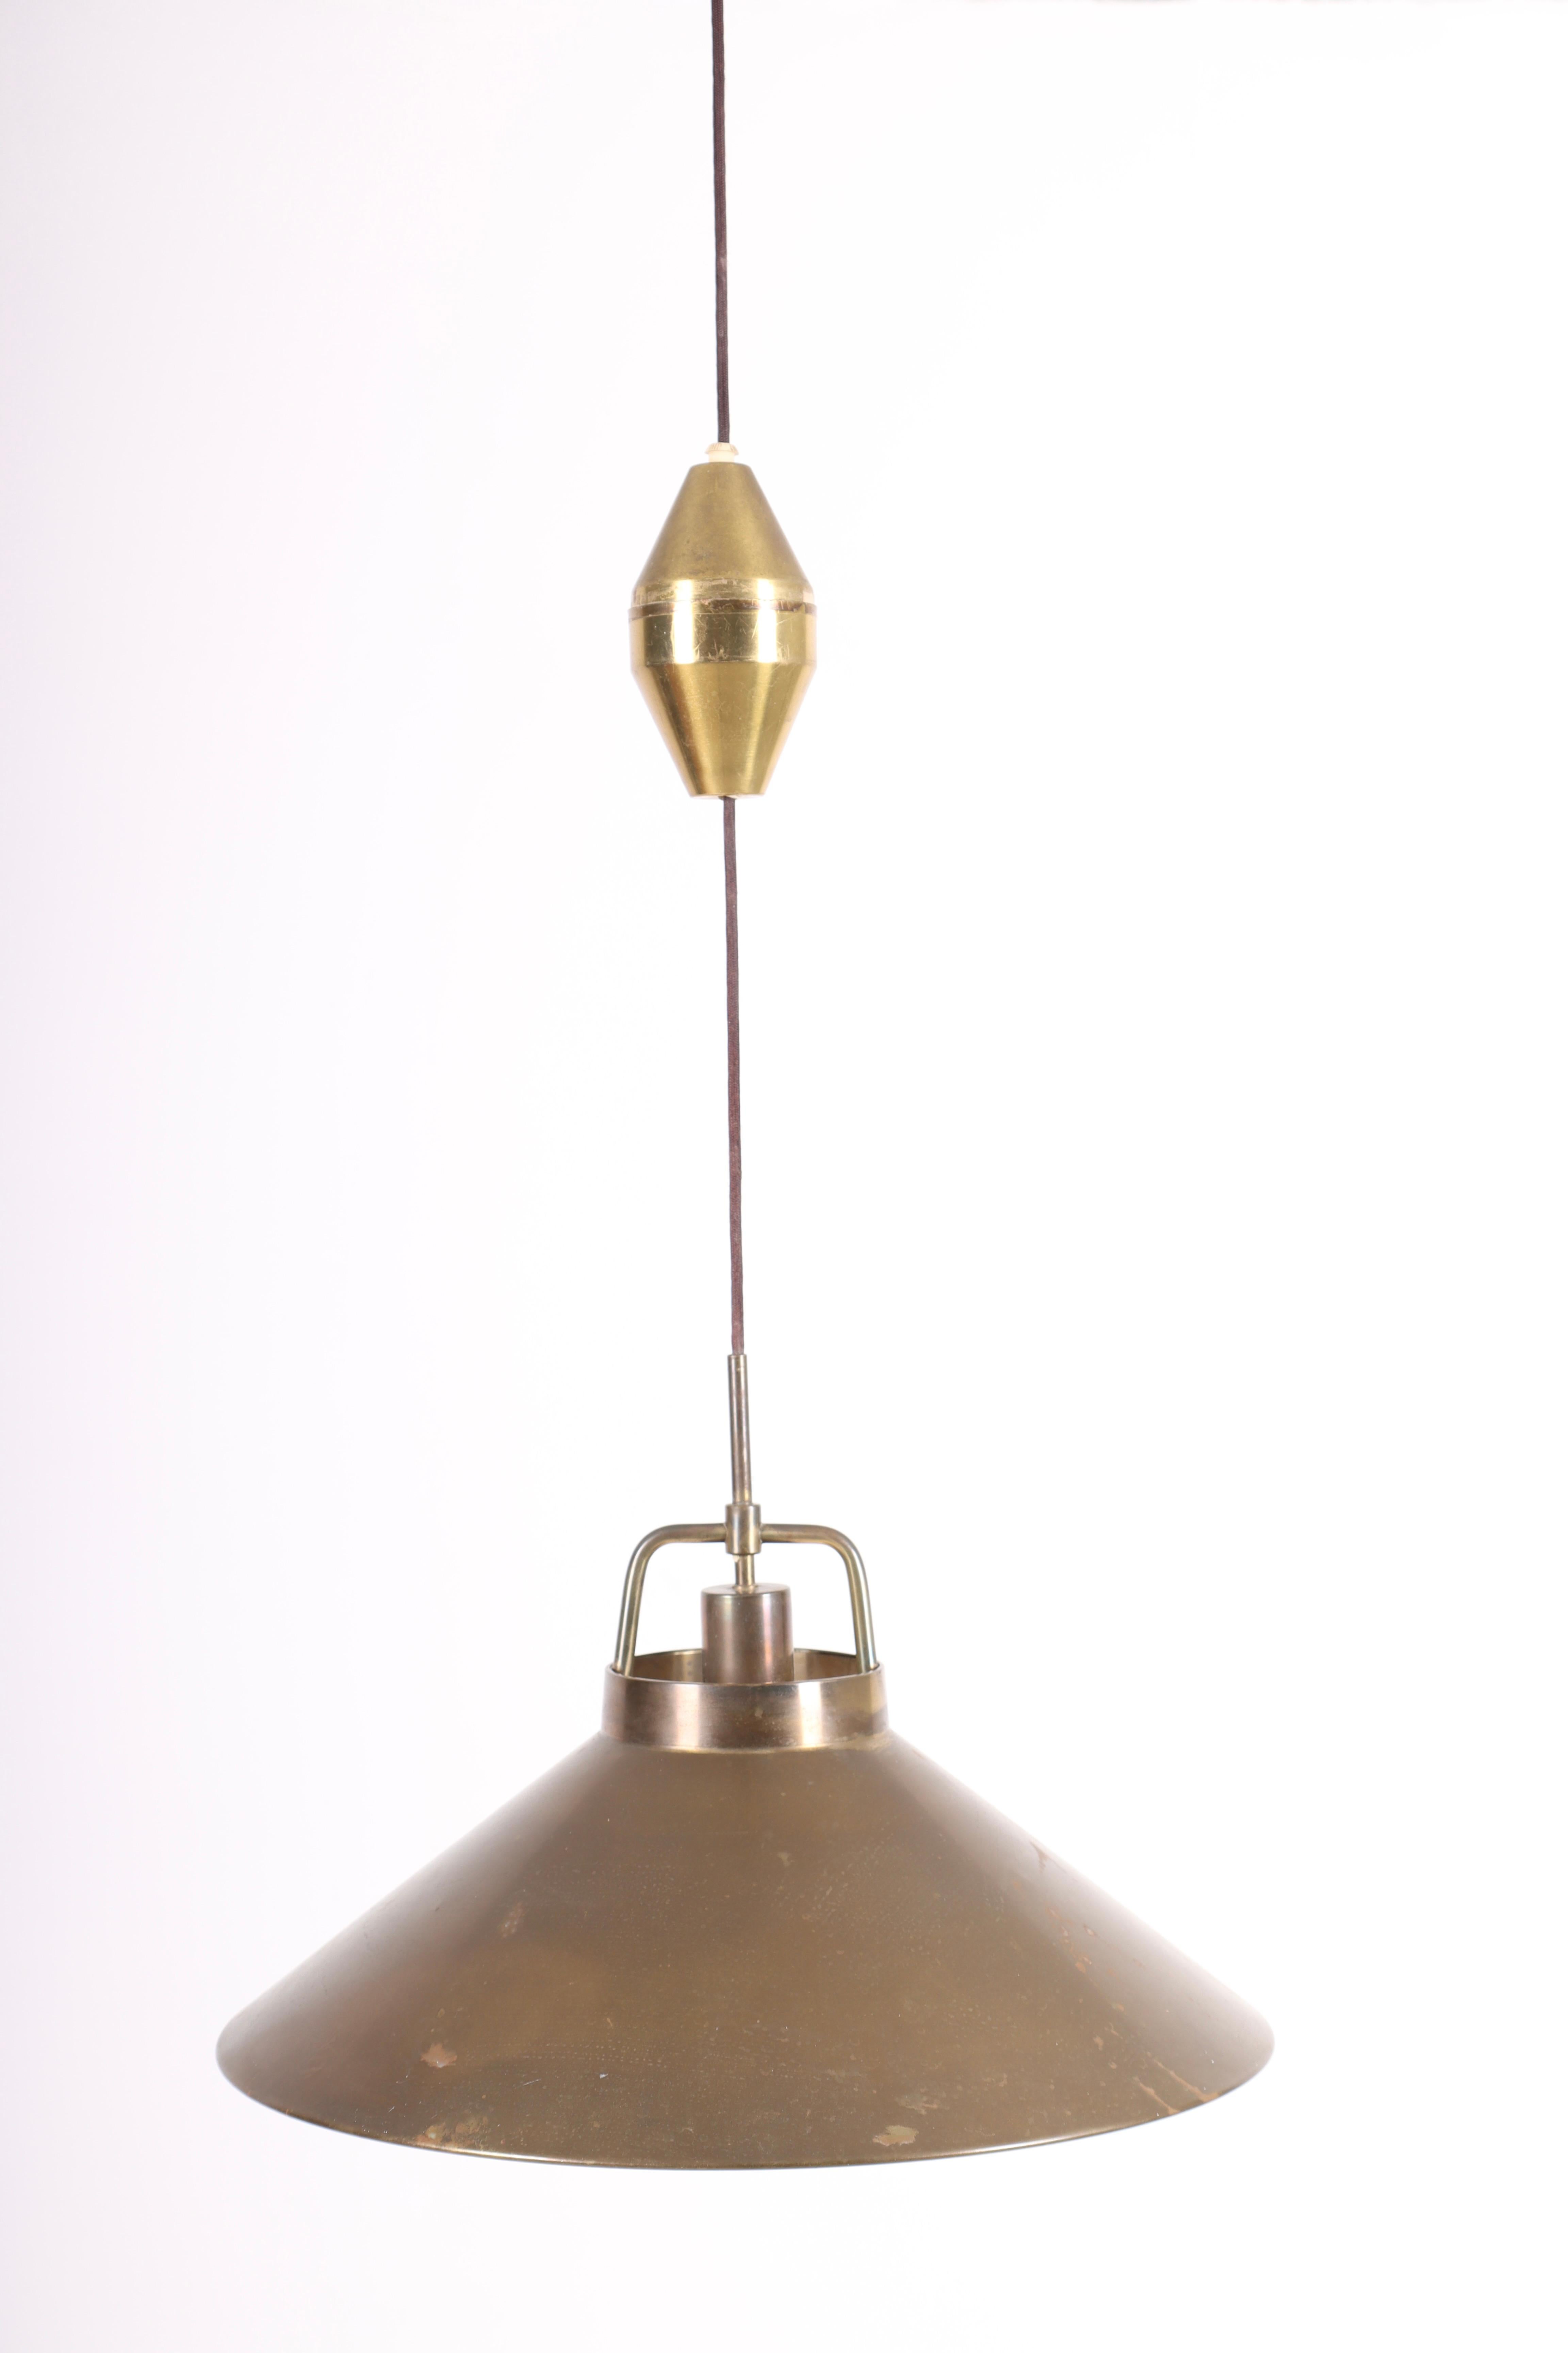 Mid-20th Century Midcentury Pendant in Brass by Frits Schlegel, Danish Design, 1960s For Sale